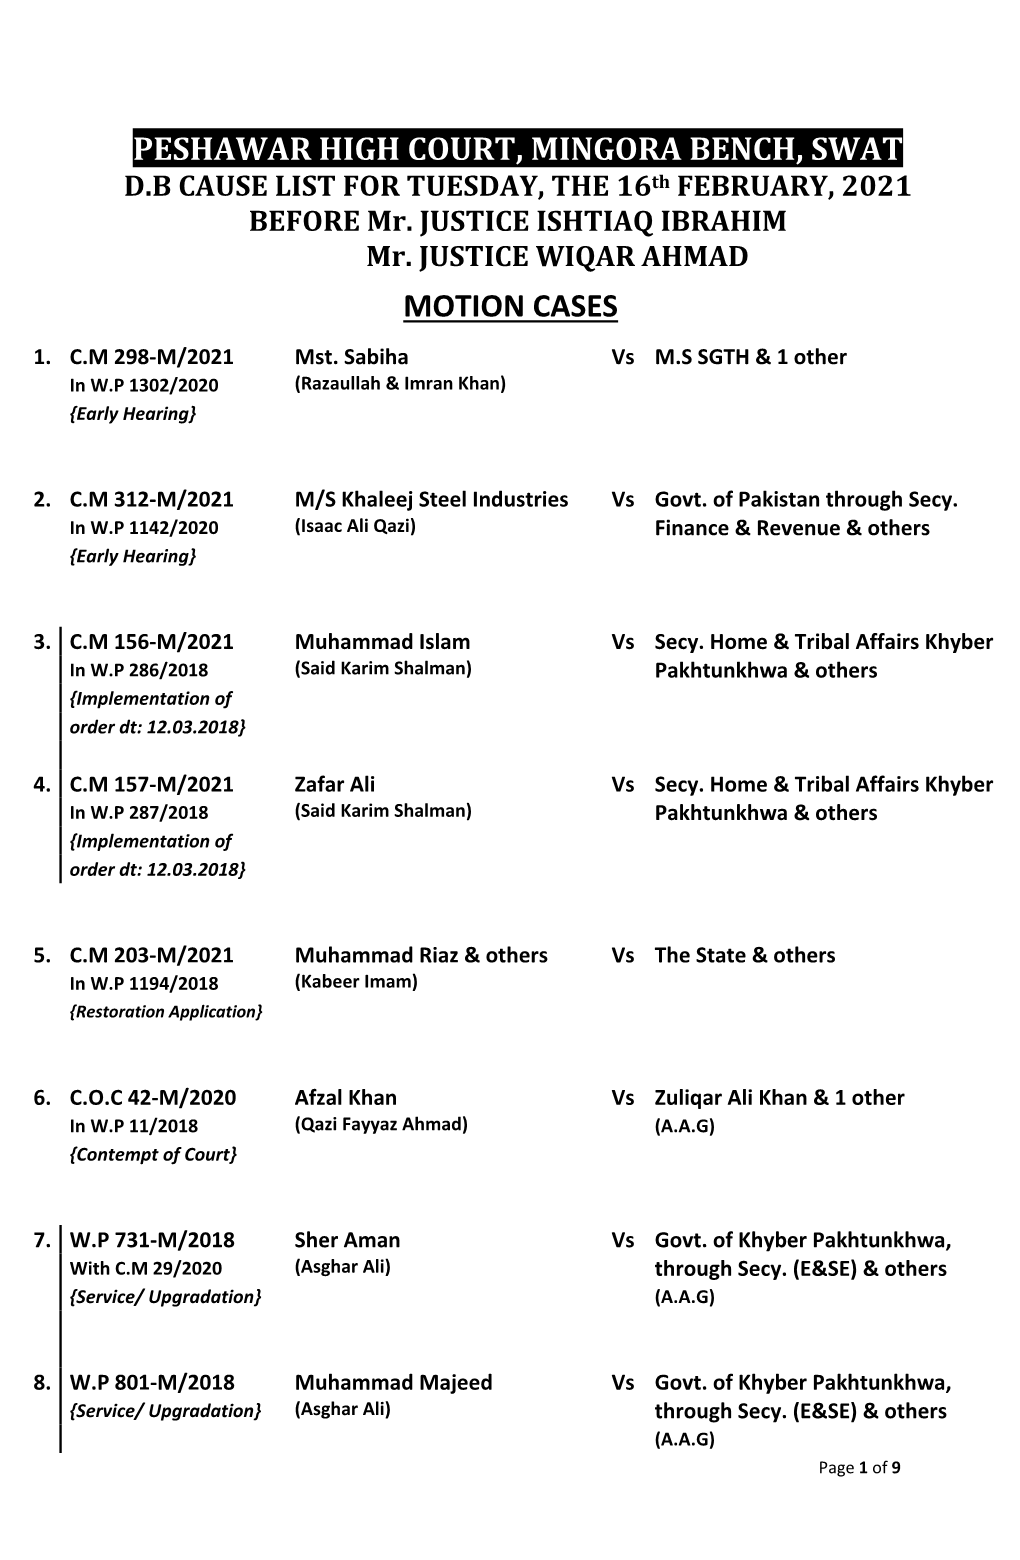 PESHAWAR HIGH COURT, MINGORA BENCH, SWAT D.B CAUSE LIST for TUESDAY, the 16Th FEBRUARY, 2021 BEFORE Mr